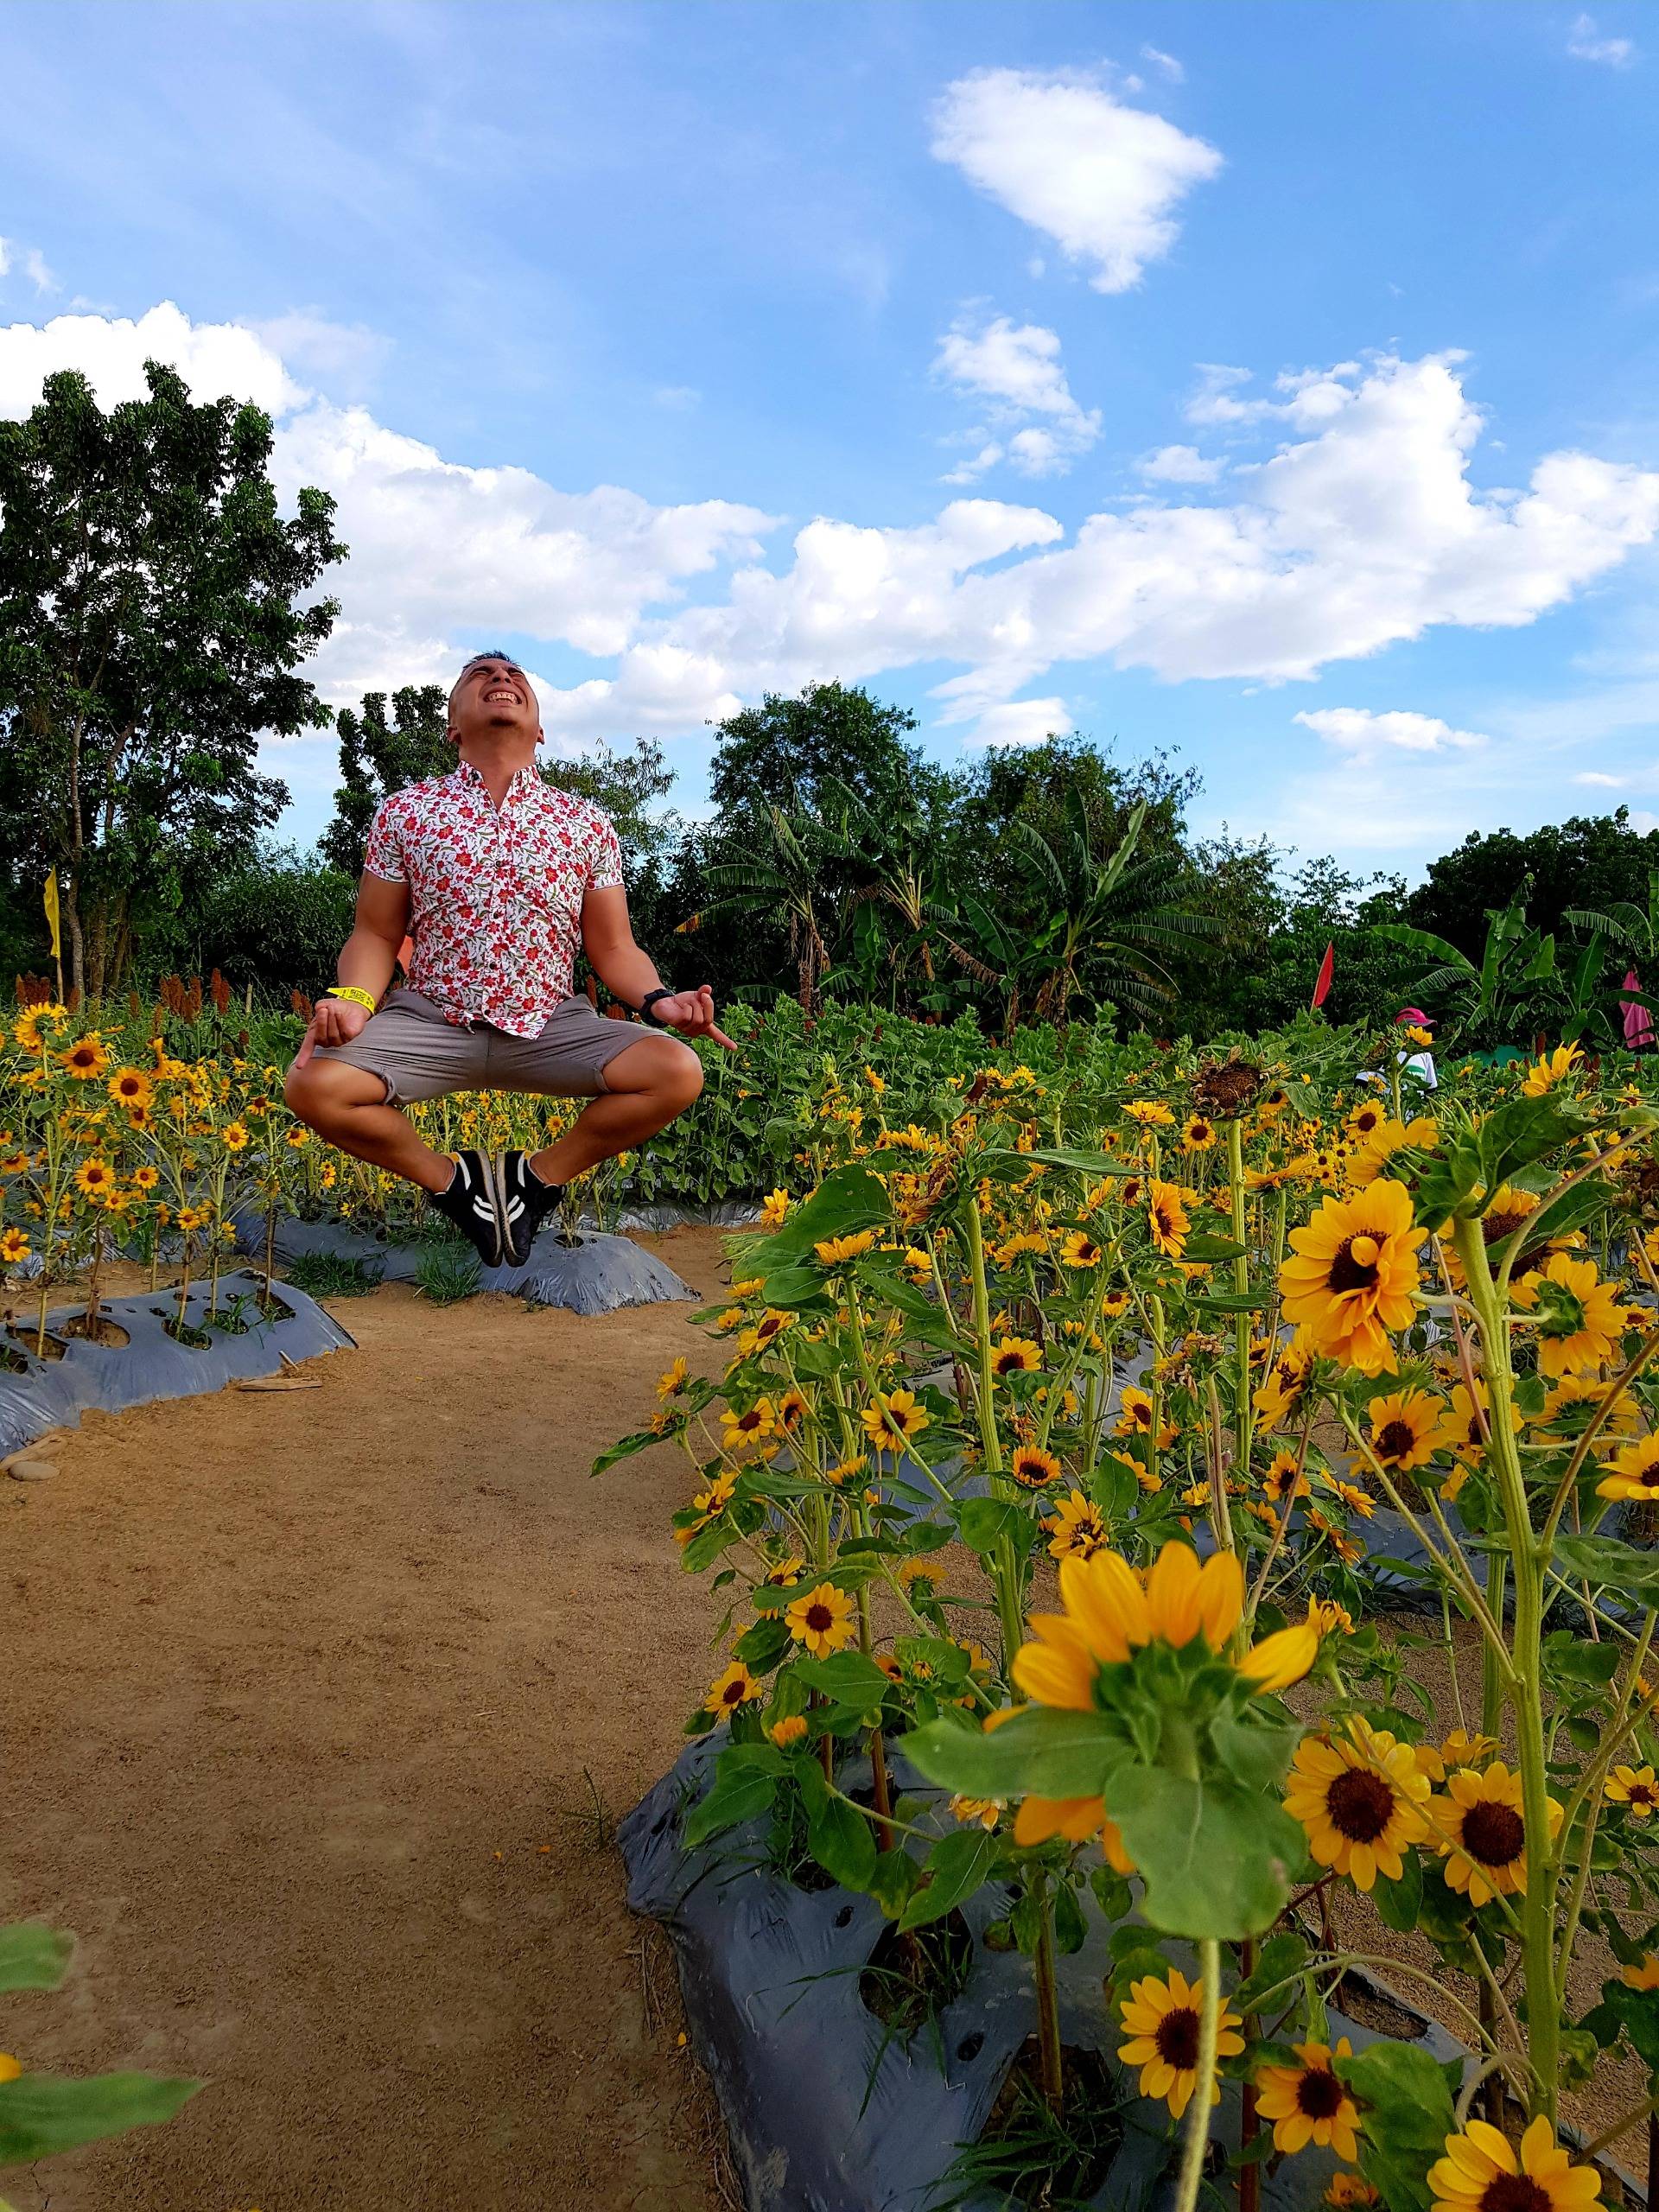 Have you been to the Sunflower Maze in Tayug Pangasinan?